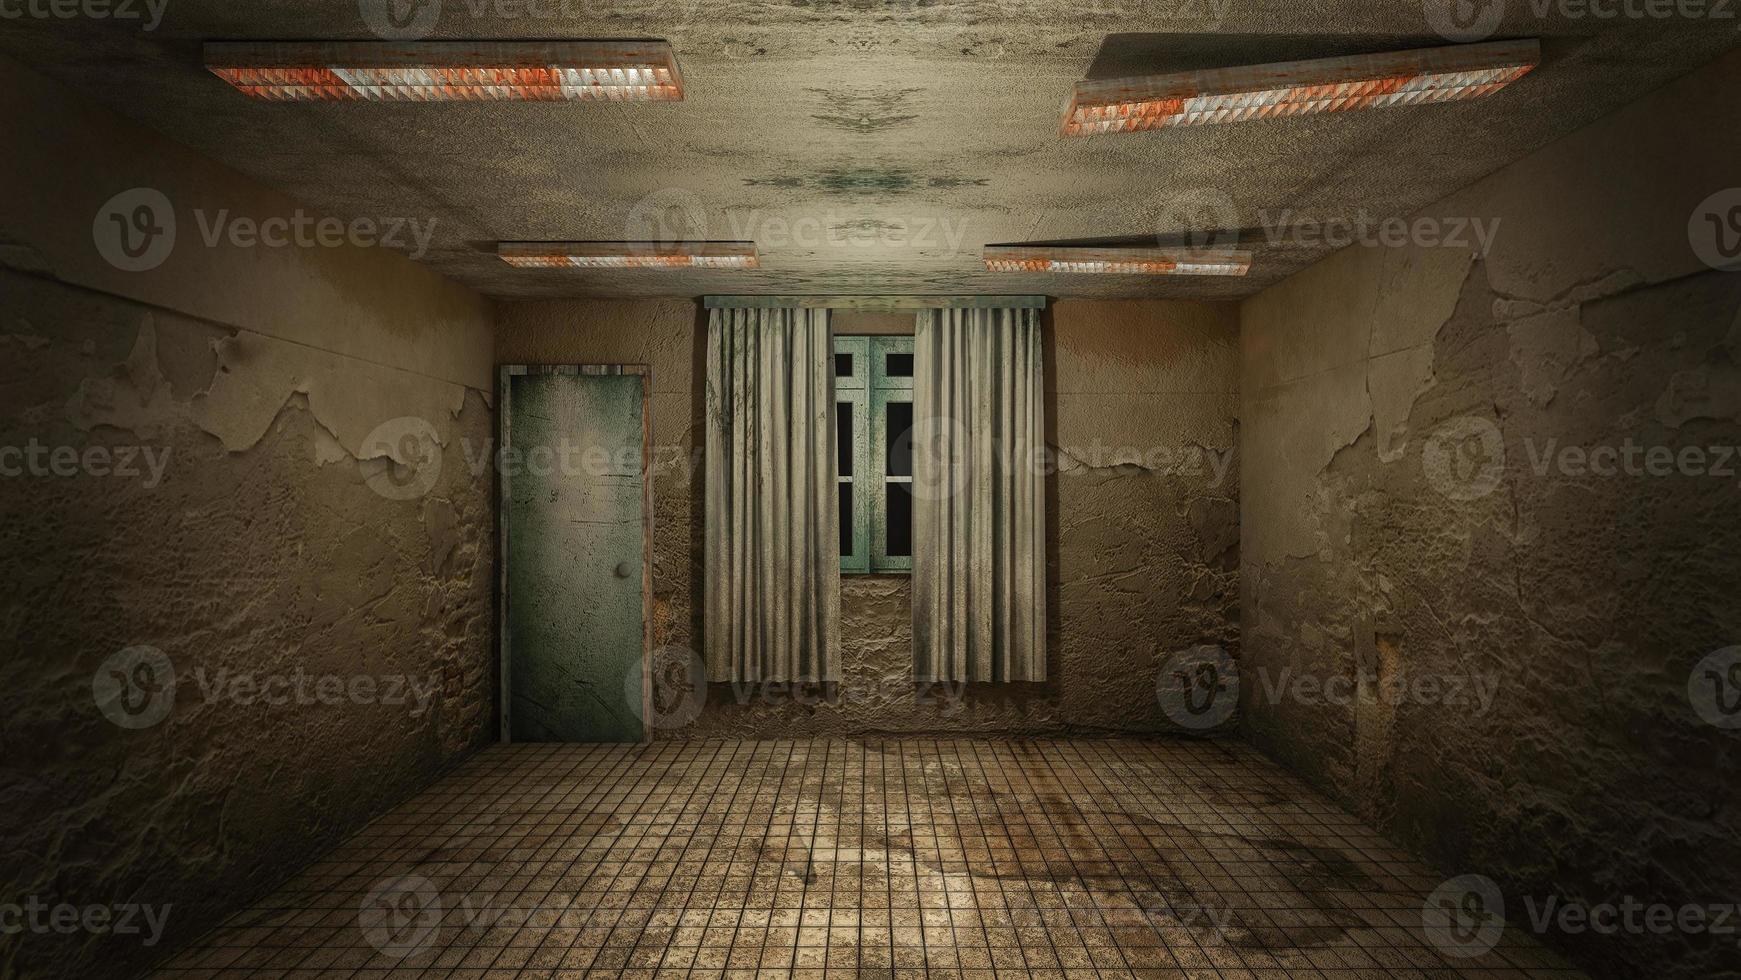 The interior design of horror and creepy damage empty room., 3D rendering. photo